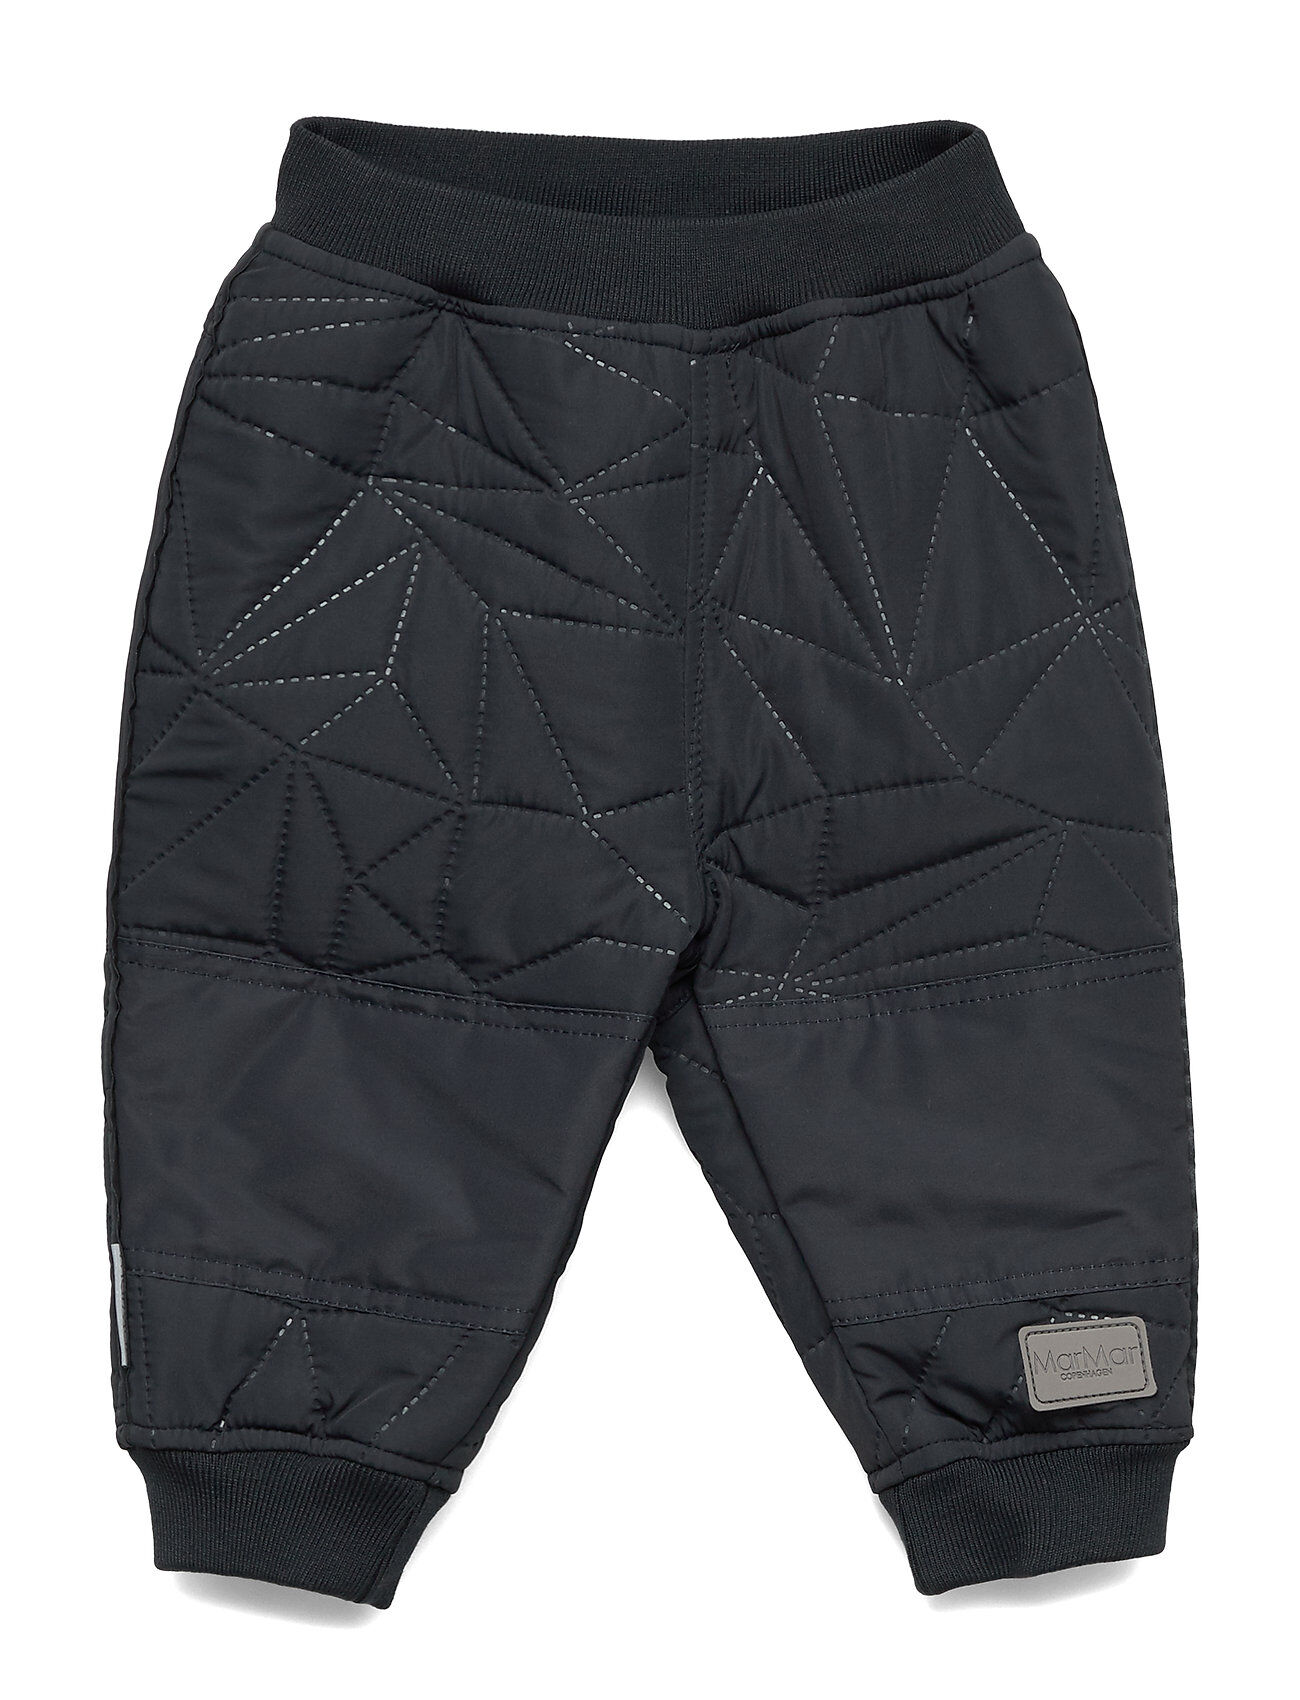 MarMar Cph Odin Outerwear Thermo Outerwear Thermo Trousers Blå MarMar Cph